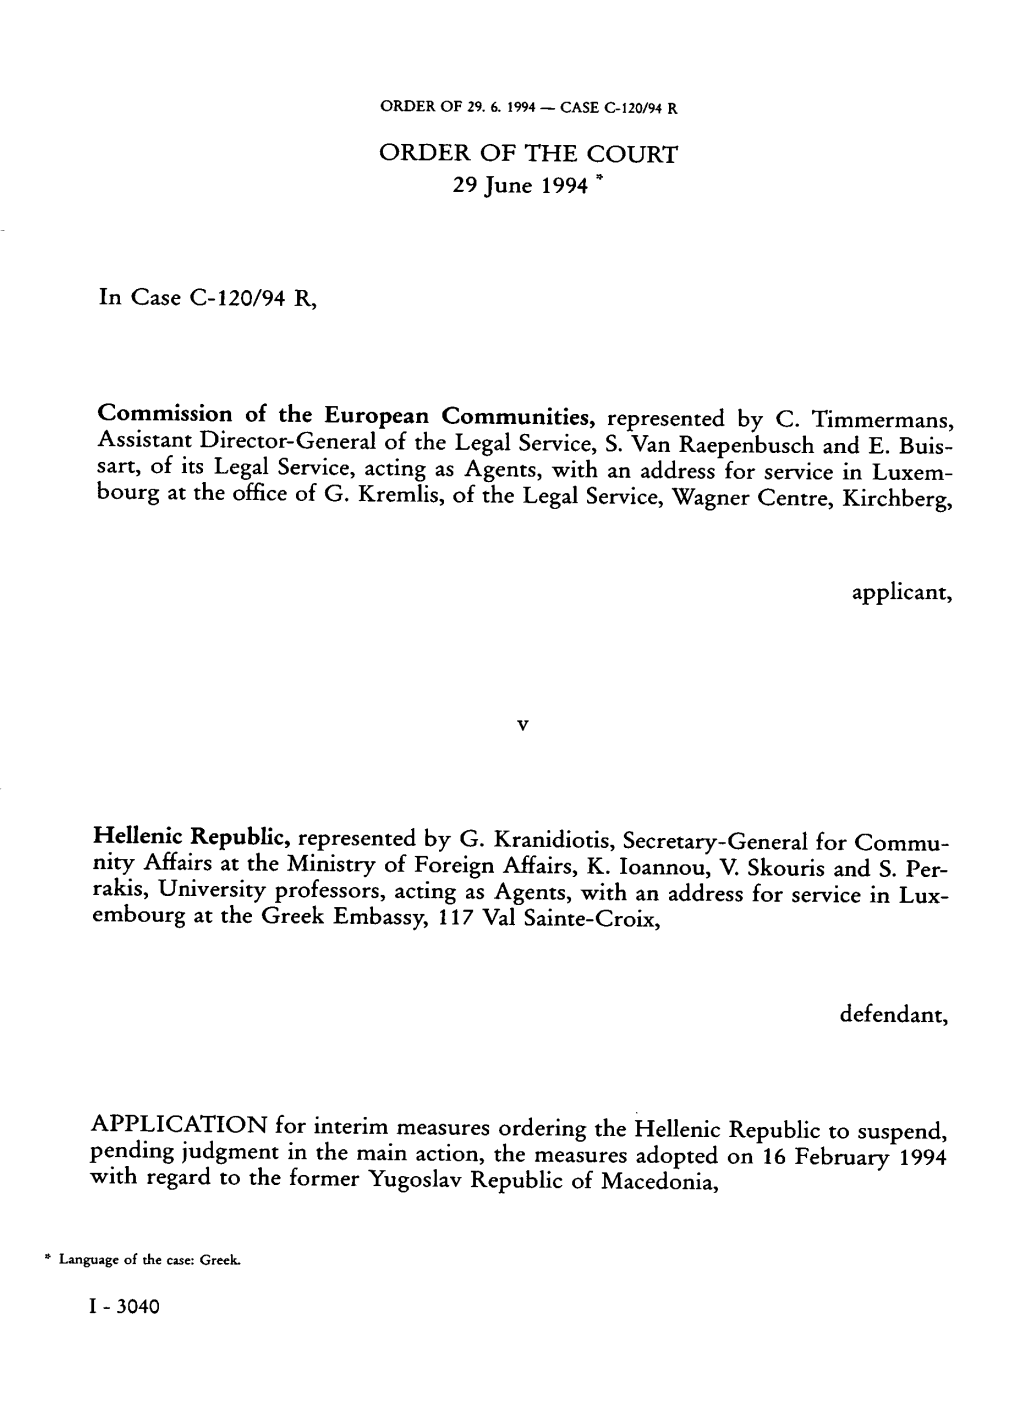 ORDER of the COURT 29 June 1994 * in Case C-120/94 R